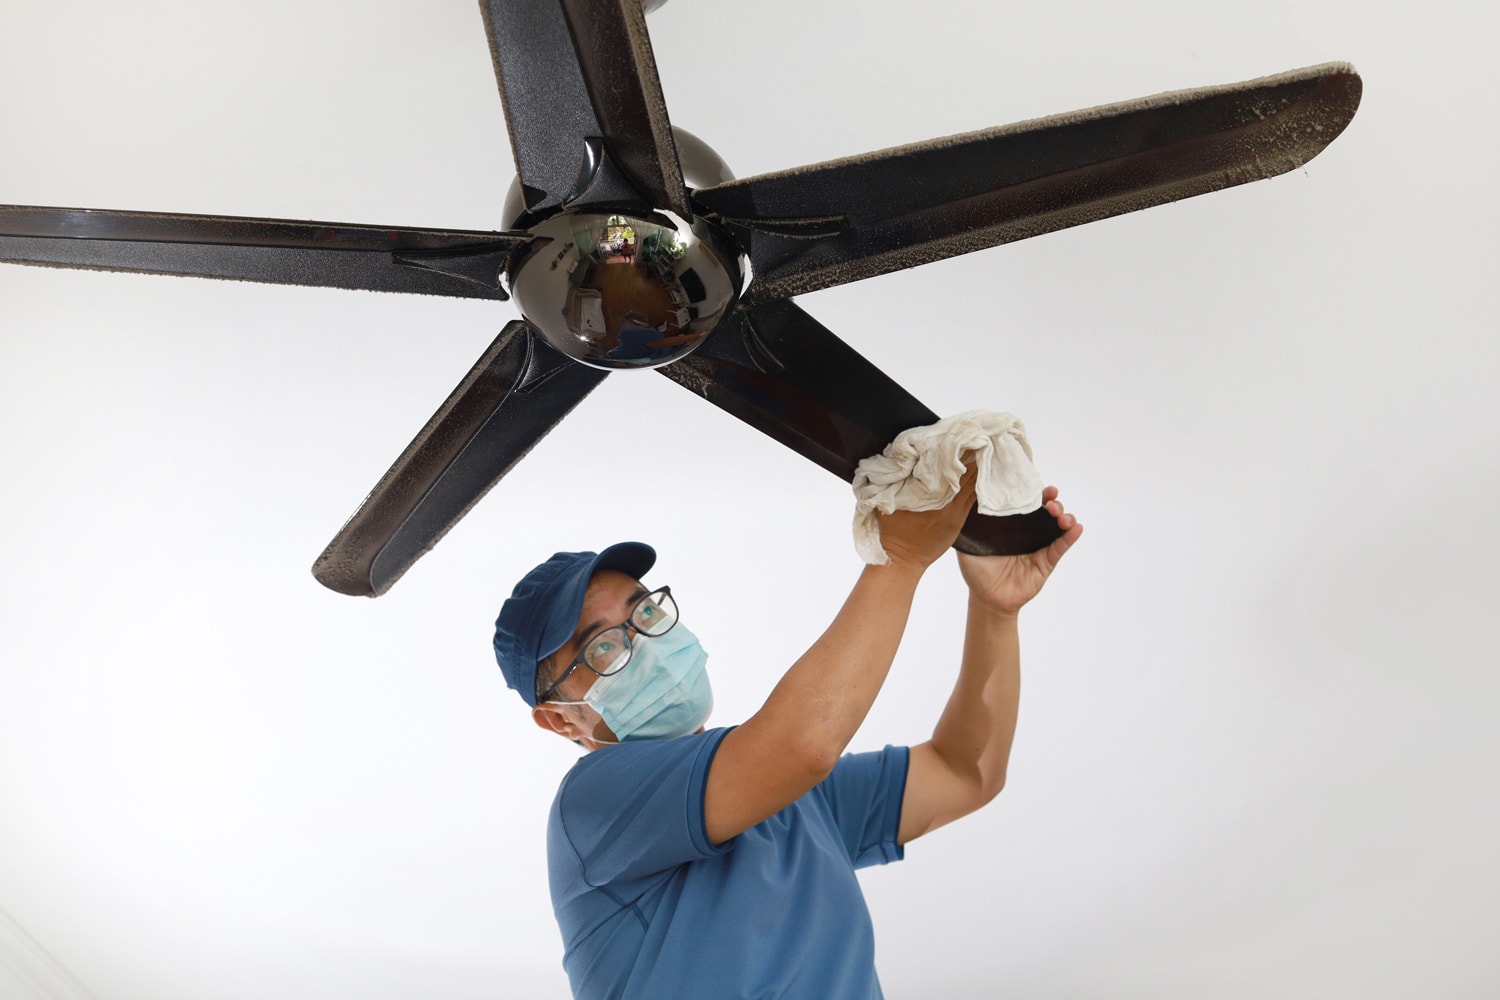  man wearing a protective mask cleaning ceiling fan at home